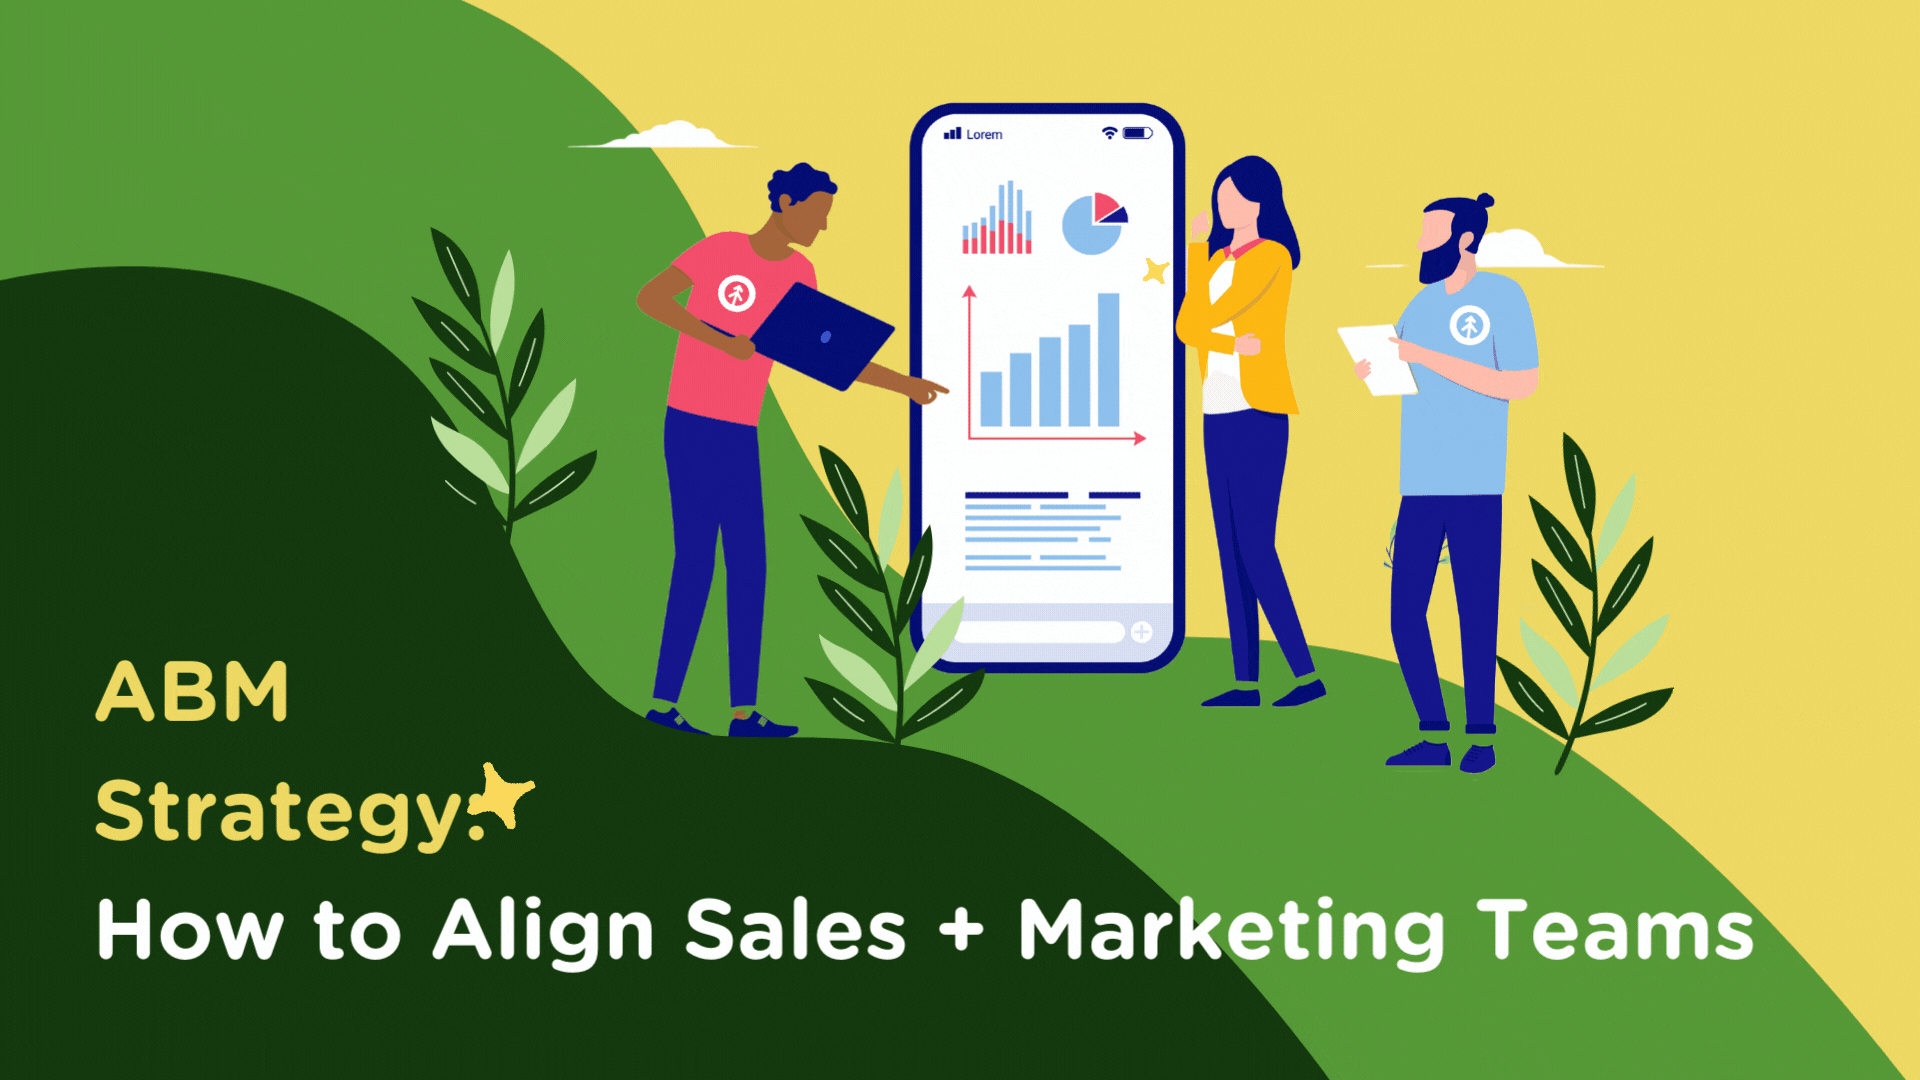 ABM Strategy: 3 Tips for Aligning Your Sales + Marketing Teams